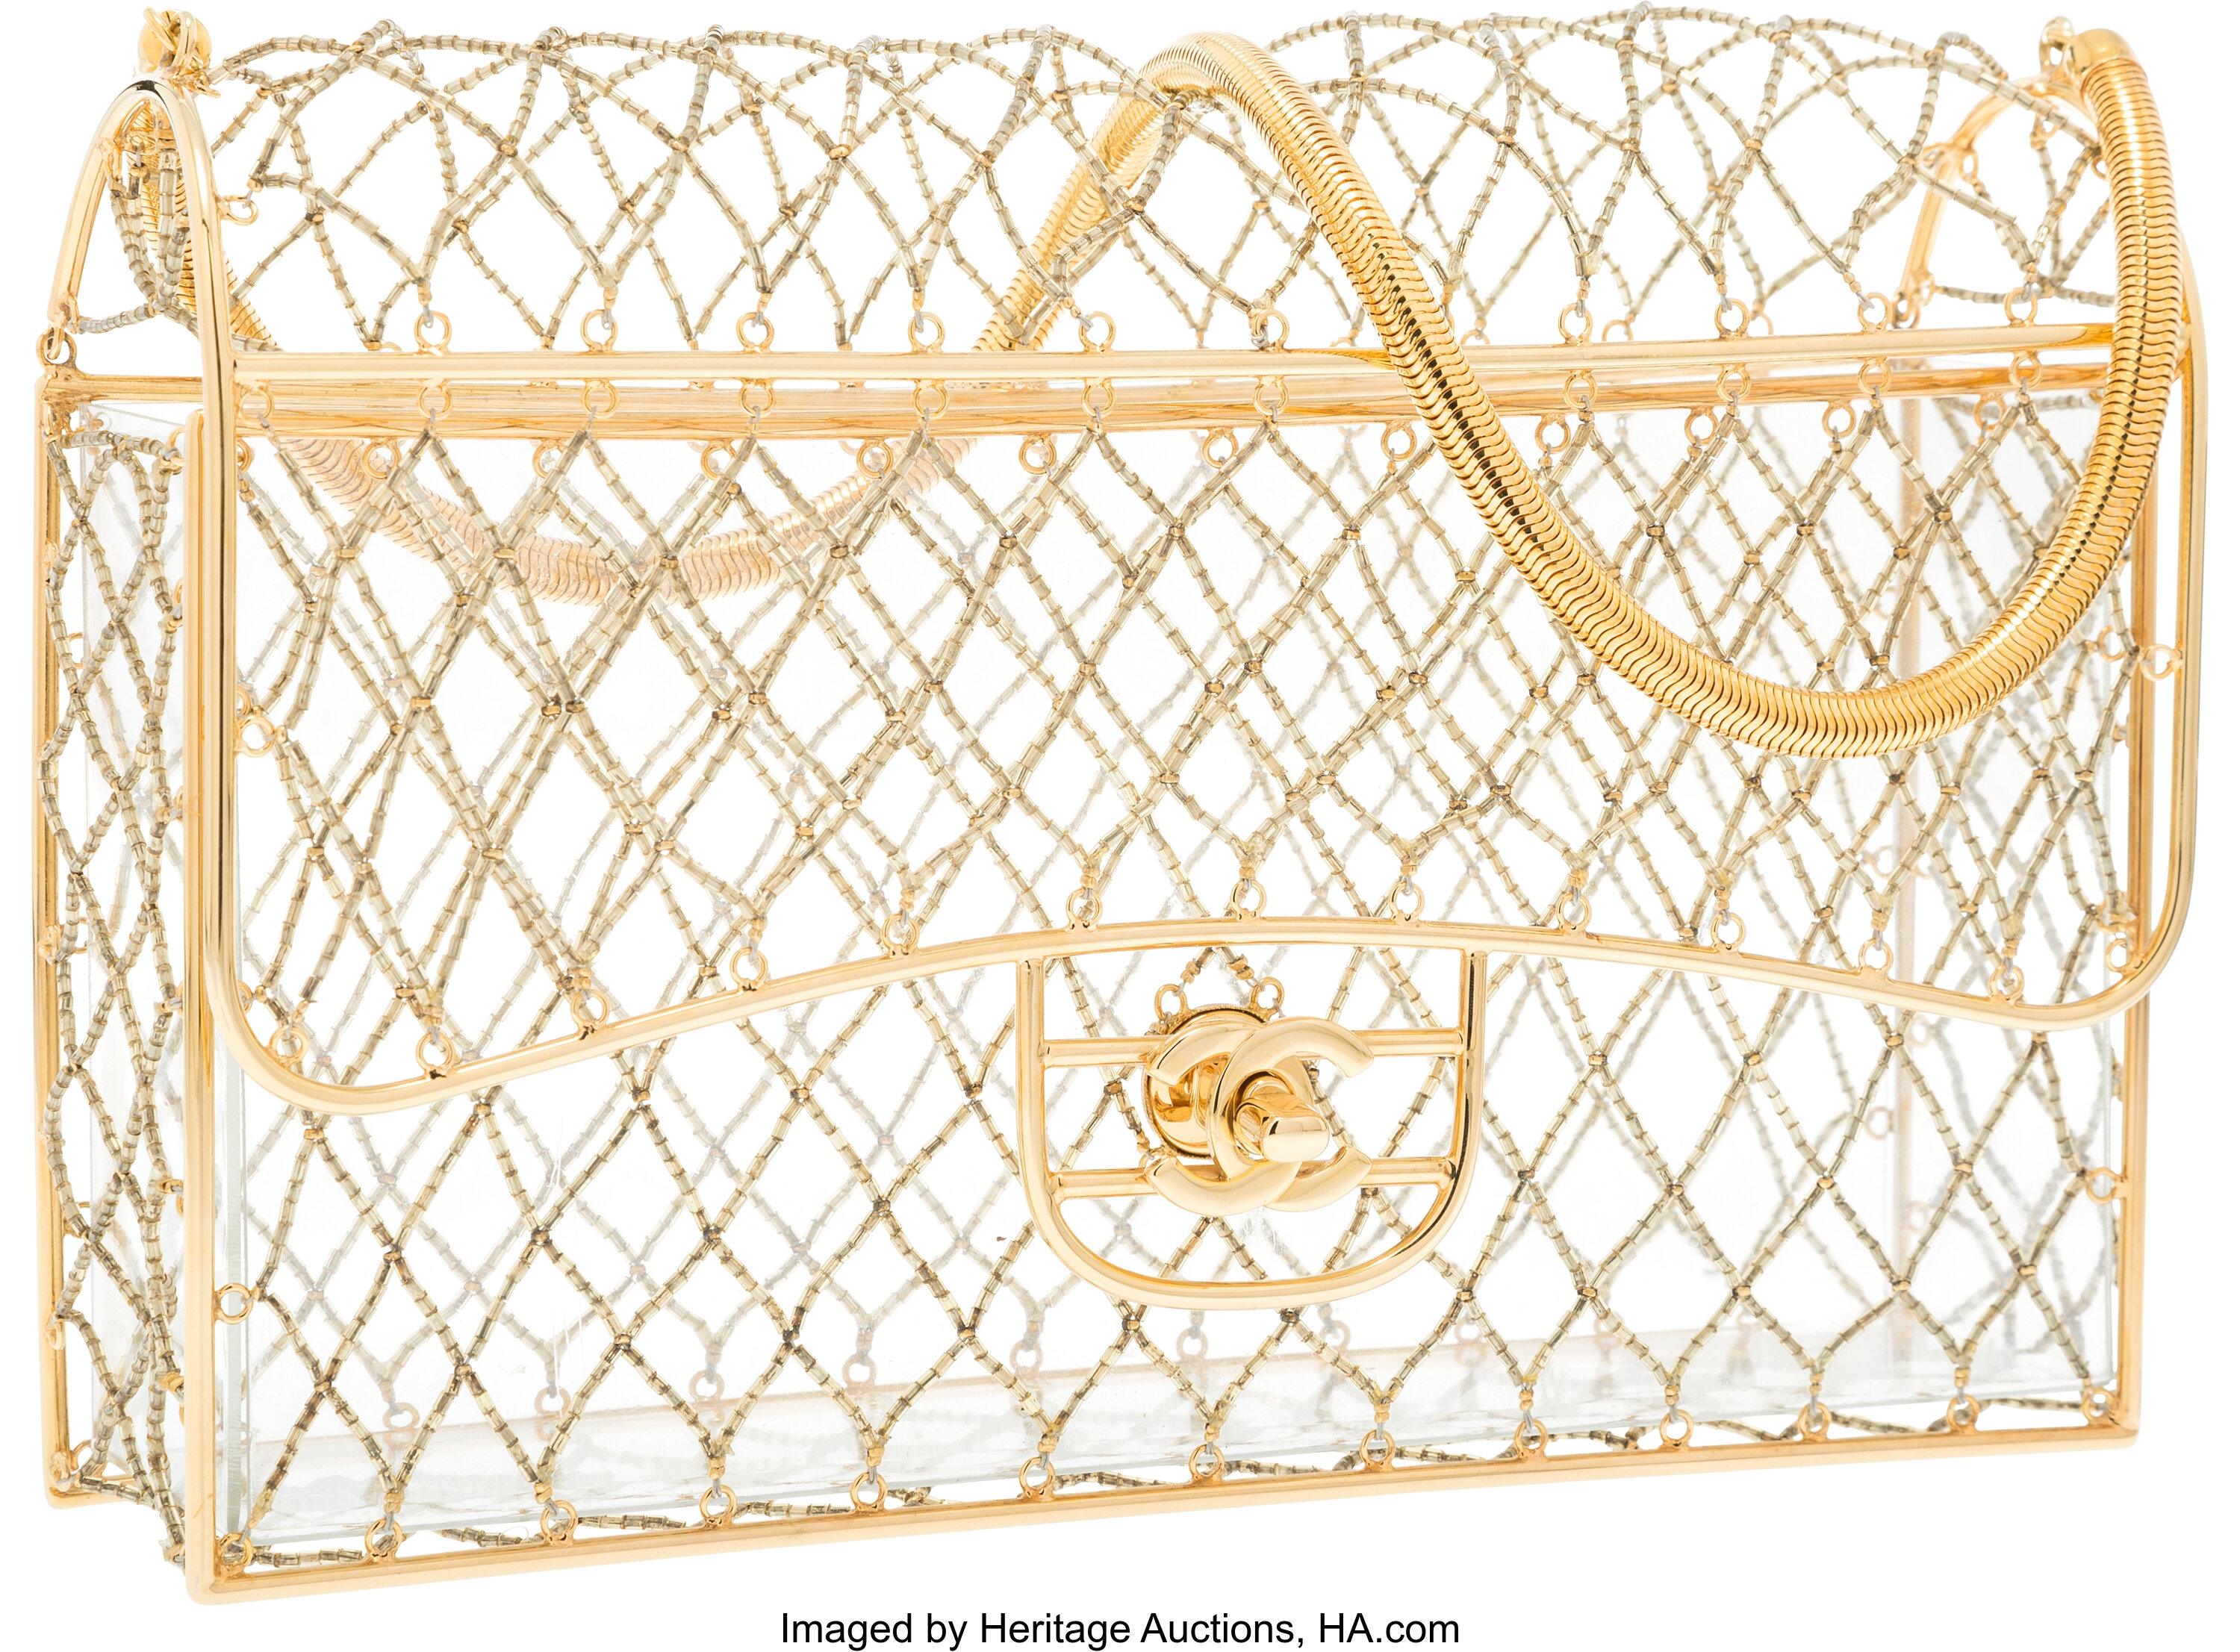 Chanel Gold Cage Beaded Medium Flap Bag with Gold Hardware. Good